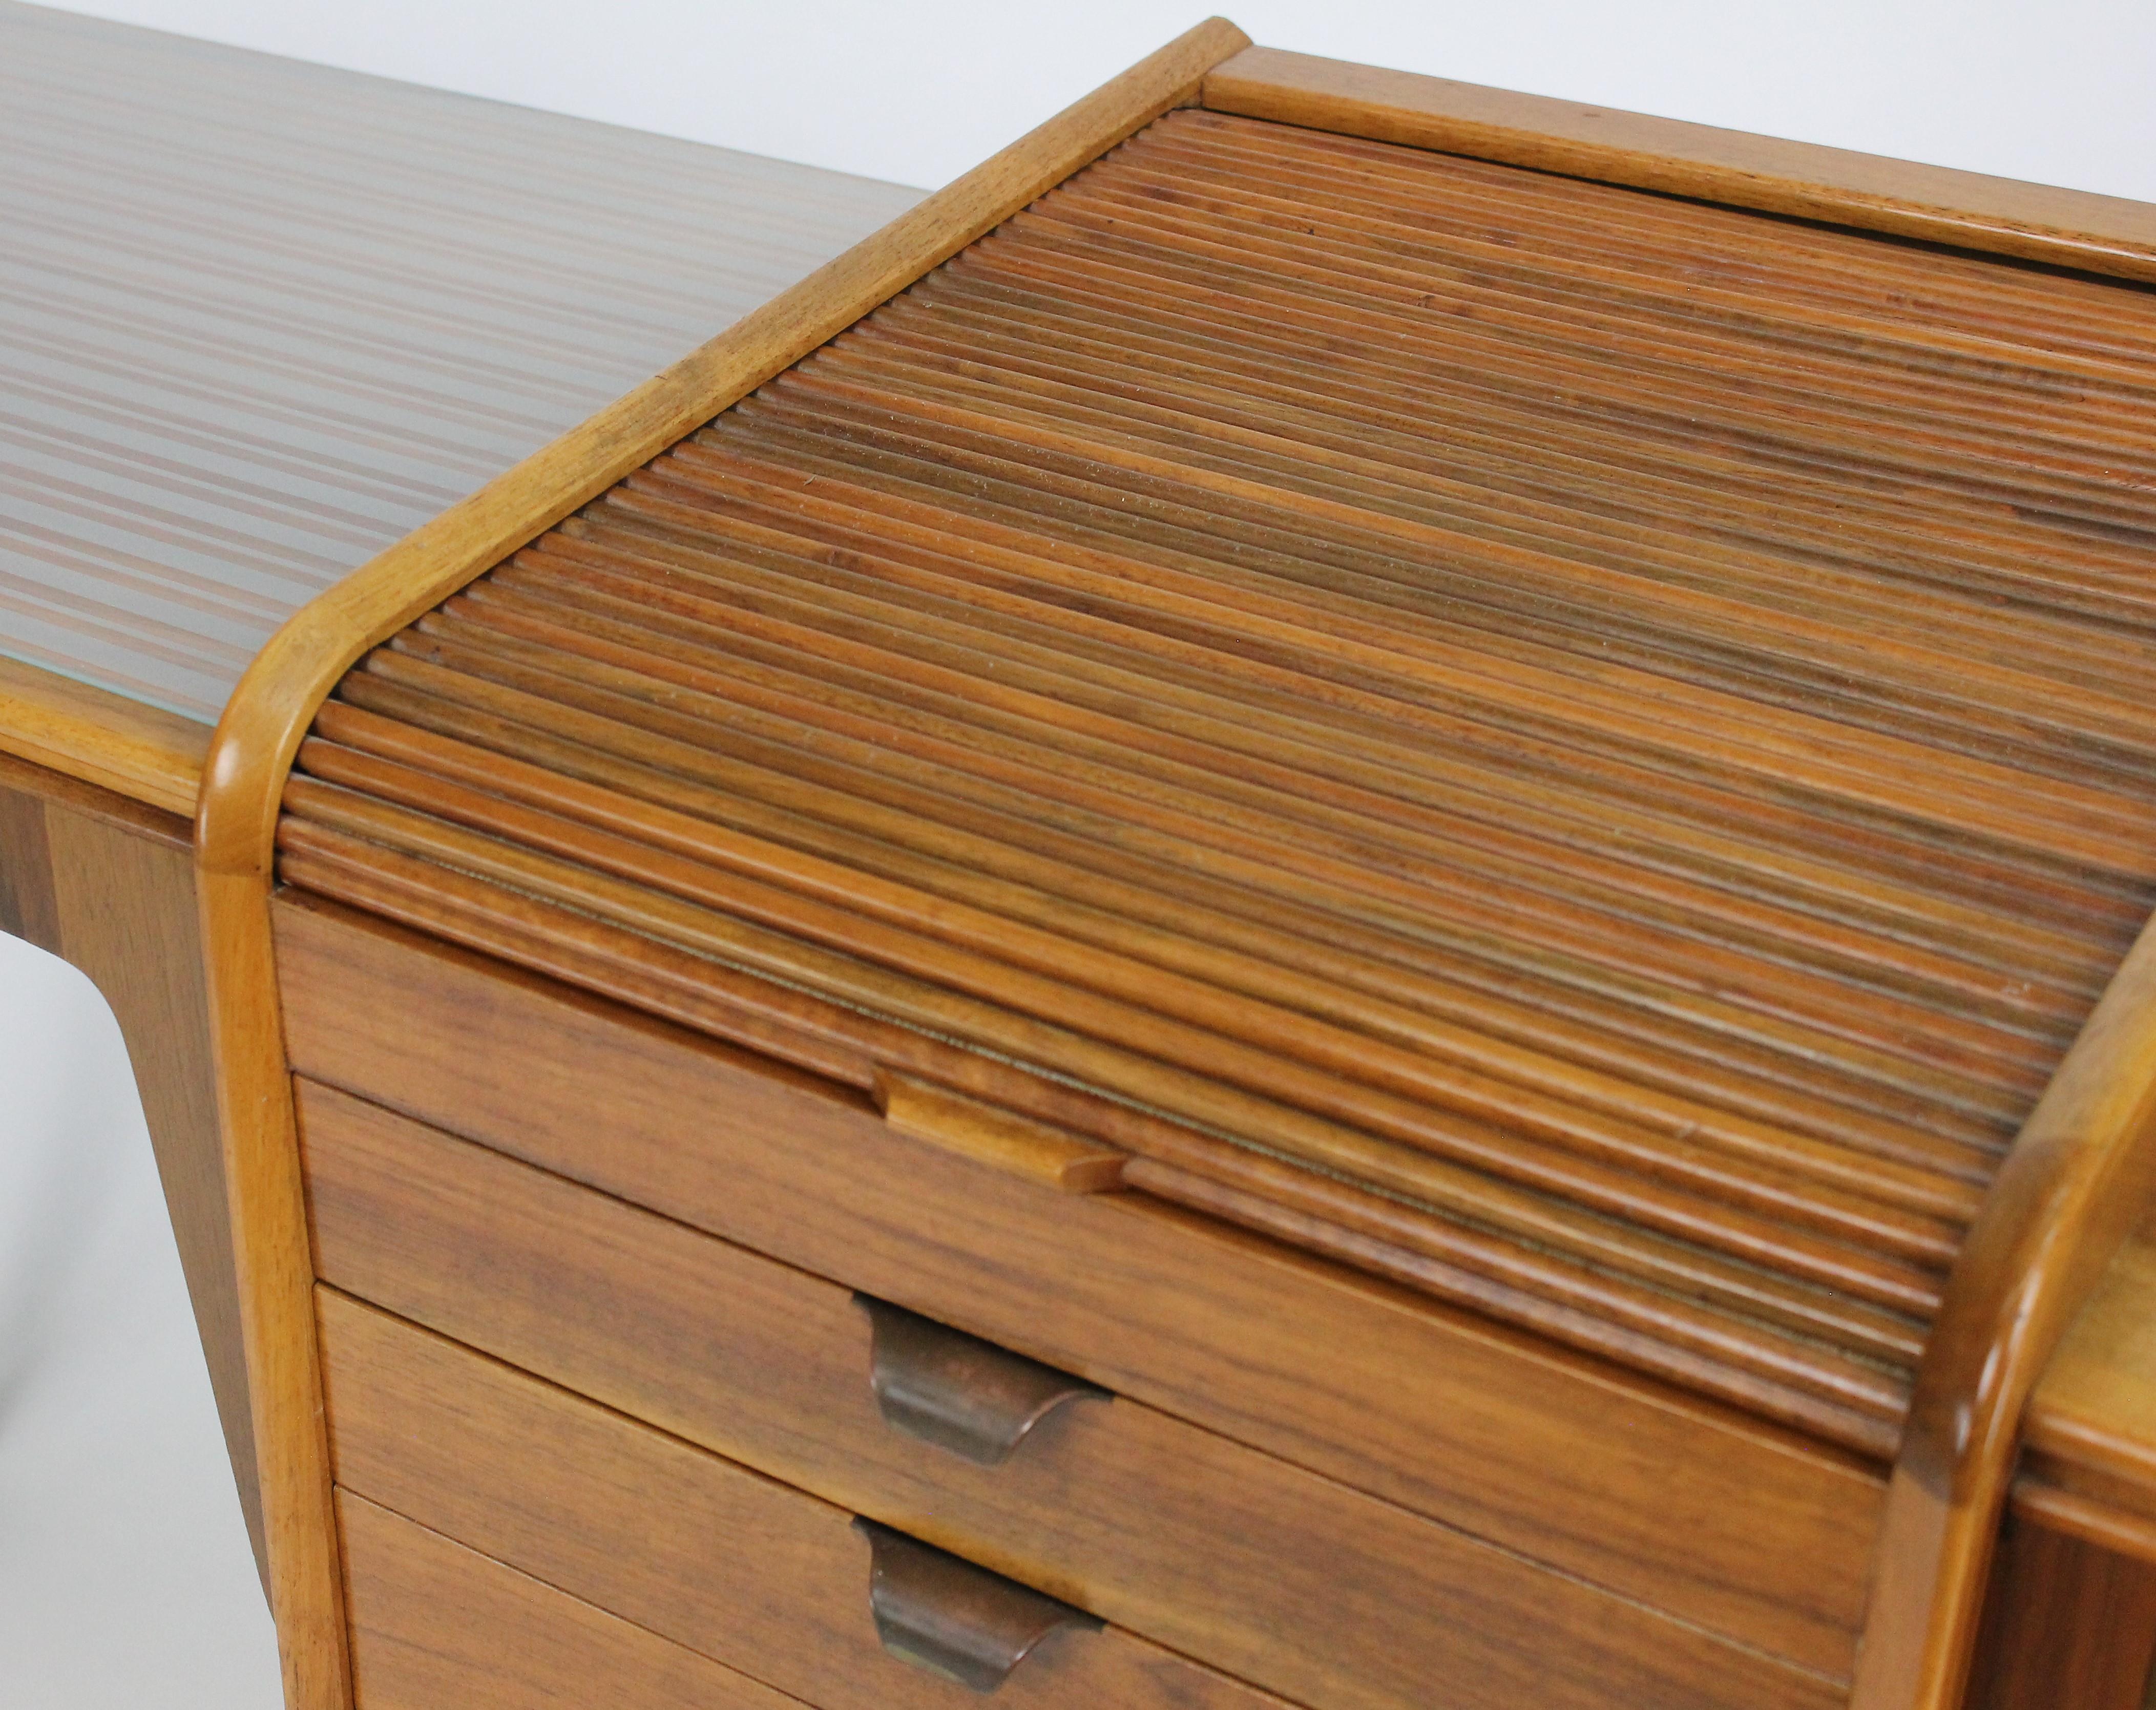 Mid-Century Modern Dressing Table or a Small Writing Desk, Swedish 1940s-1950s by Carl-Axel Acking